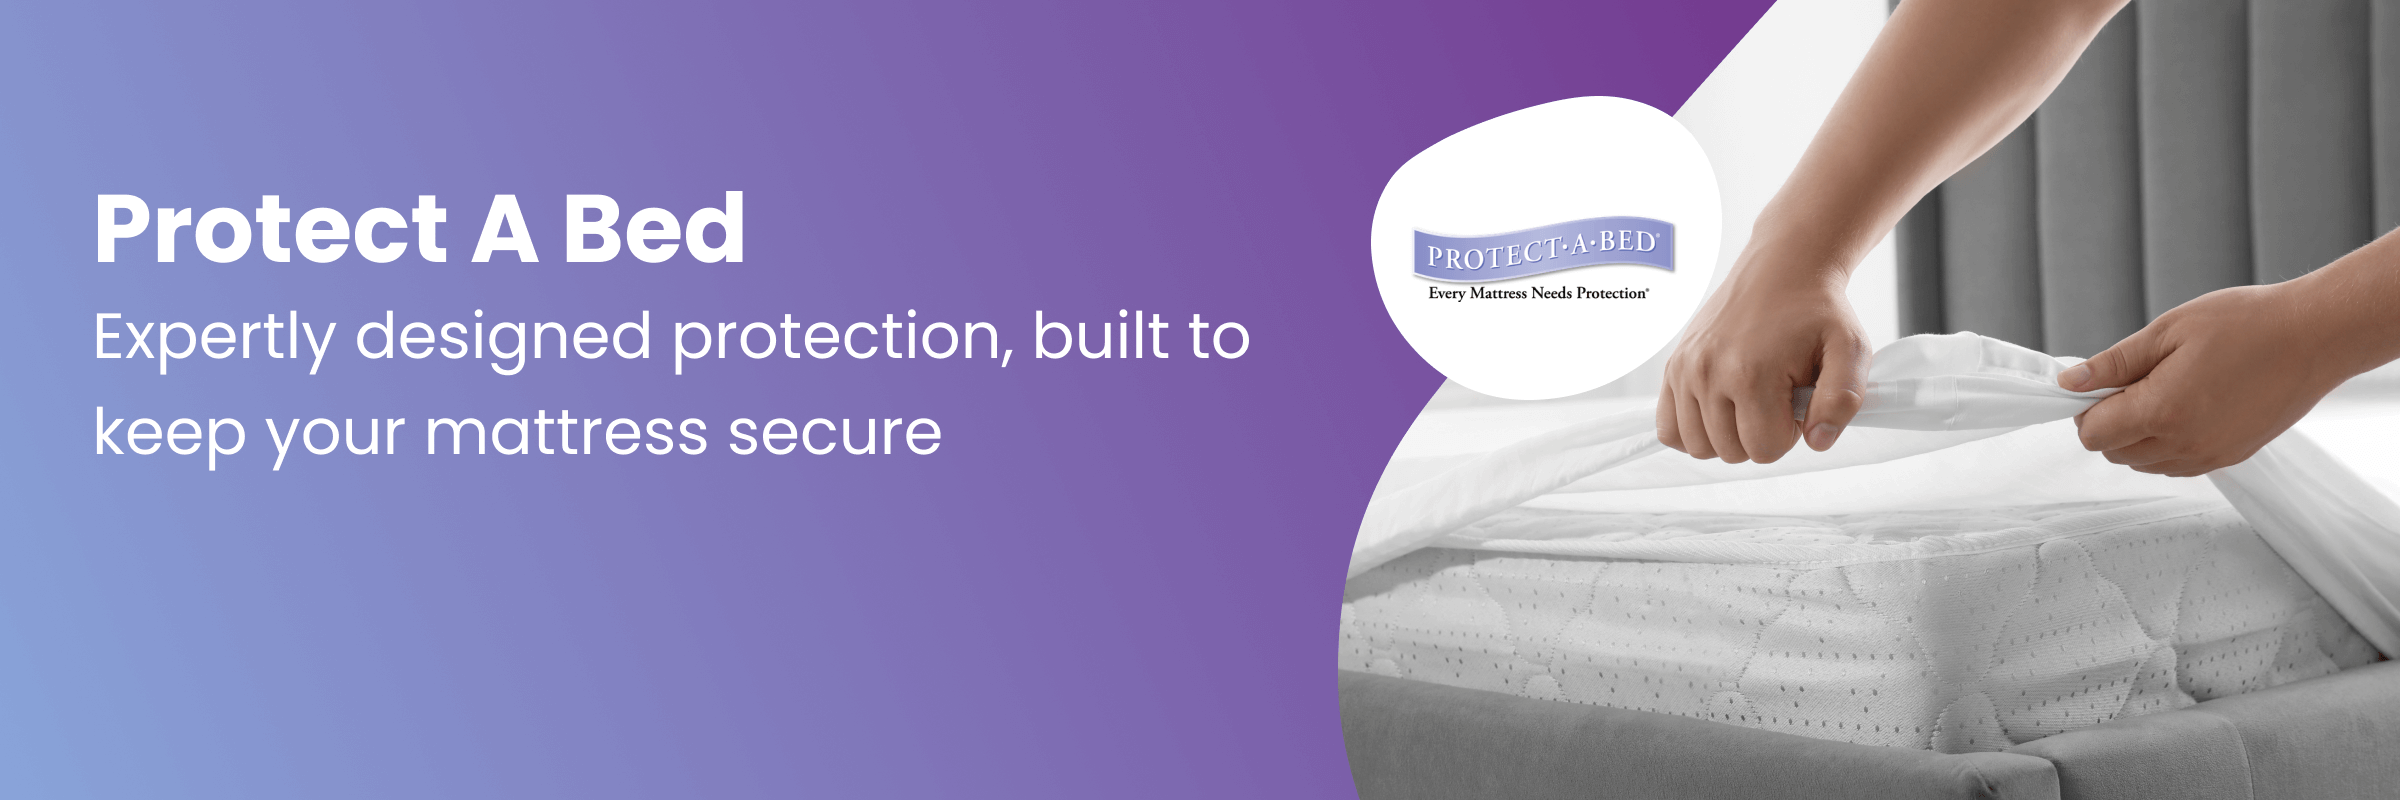 Protect A Bed at Mattress Online.